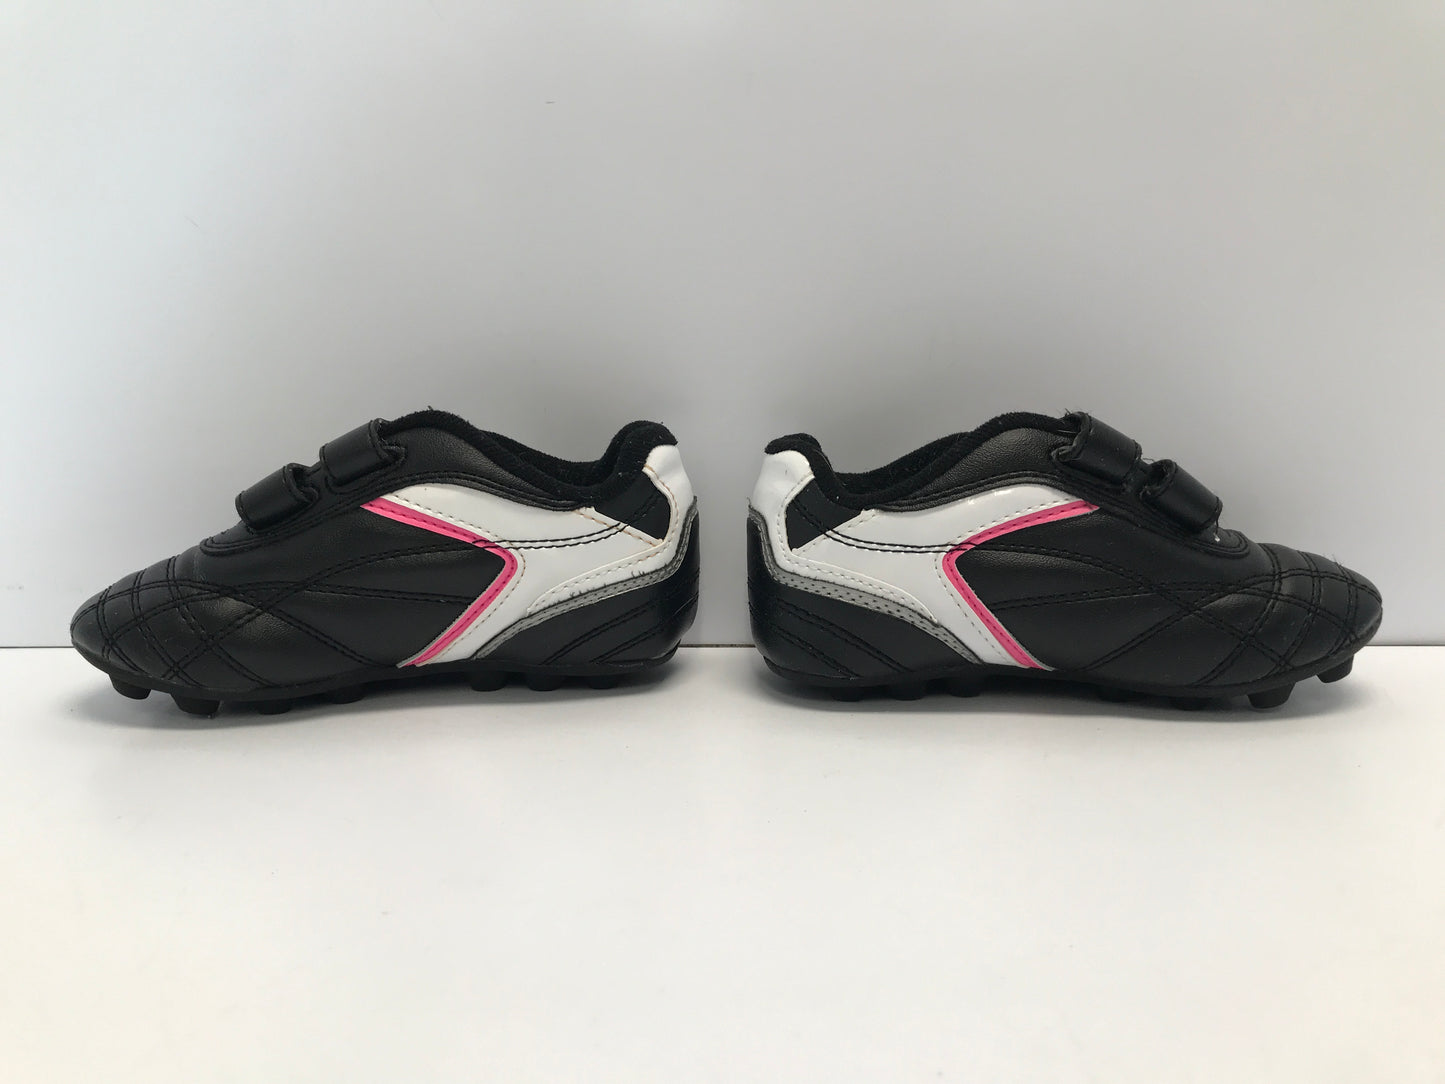 Soccer Shoes Cleats Child Size 2 Athletic Black Pink